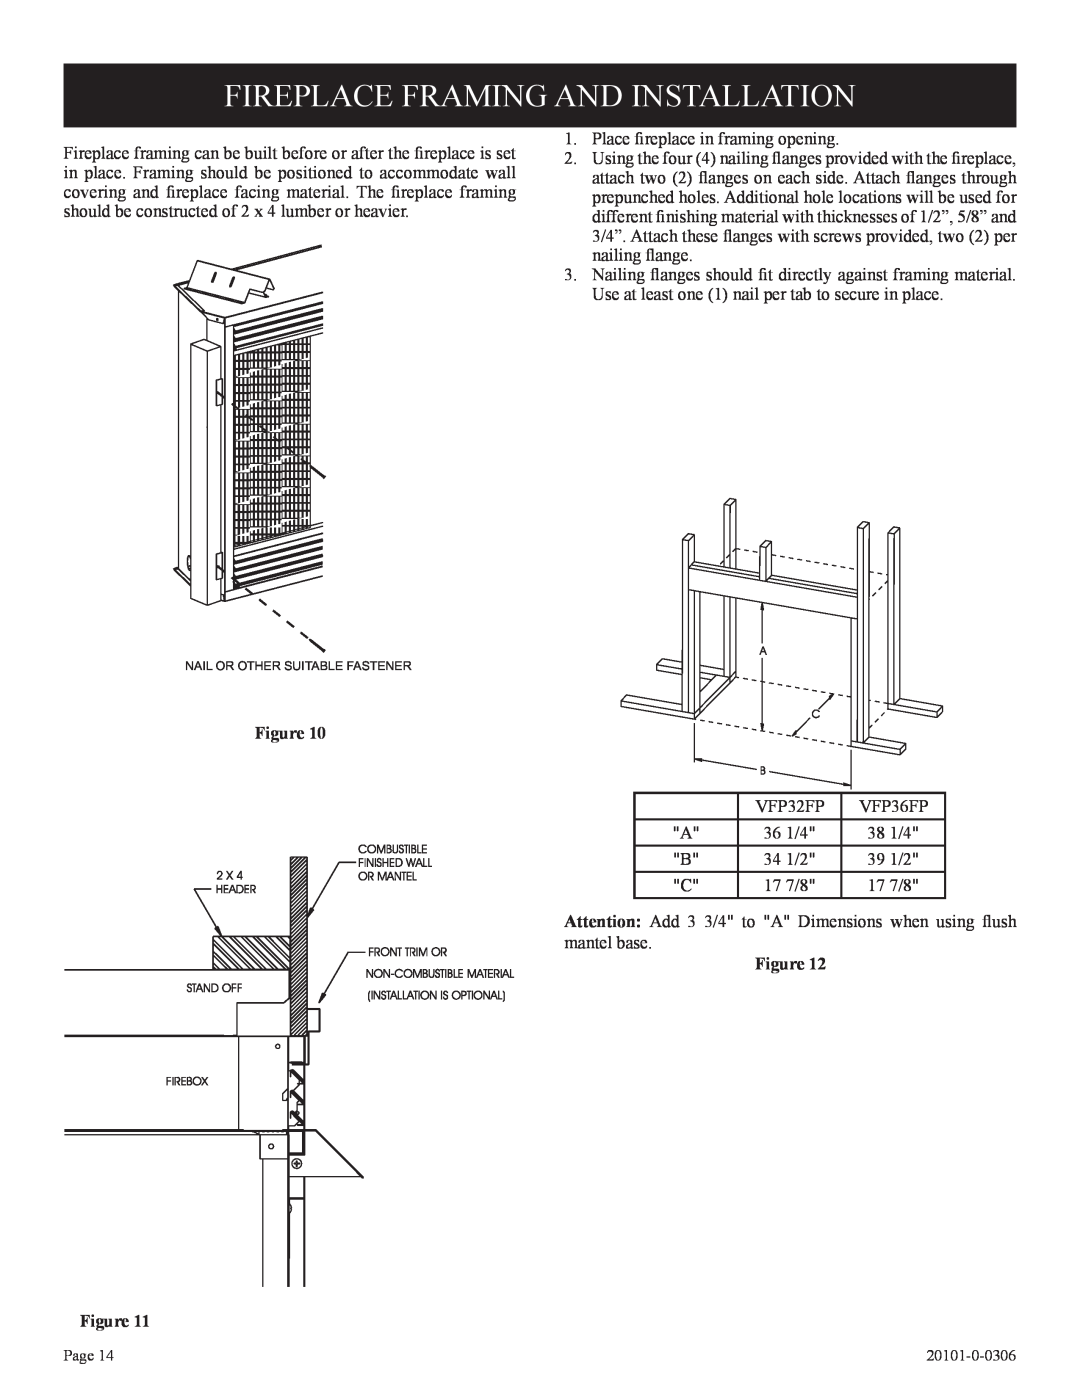 Empire Comfort Systems 21)L(N, VFP36FP, VFP32FP, 31)L(N, P)-1 Fireplace Framing And Installation, Figure Figure 